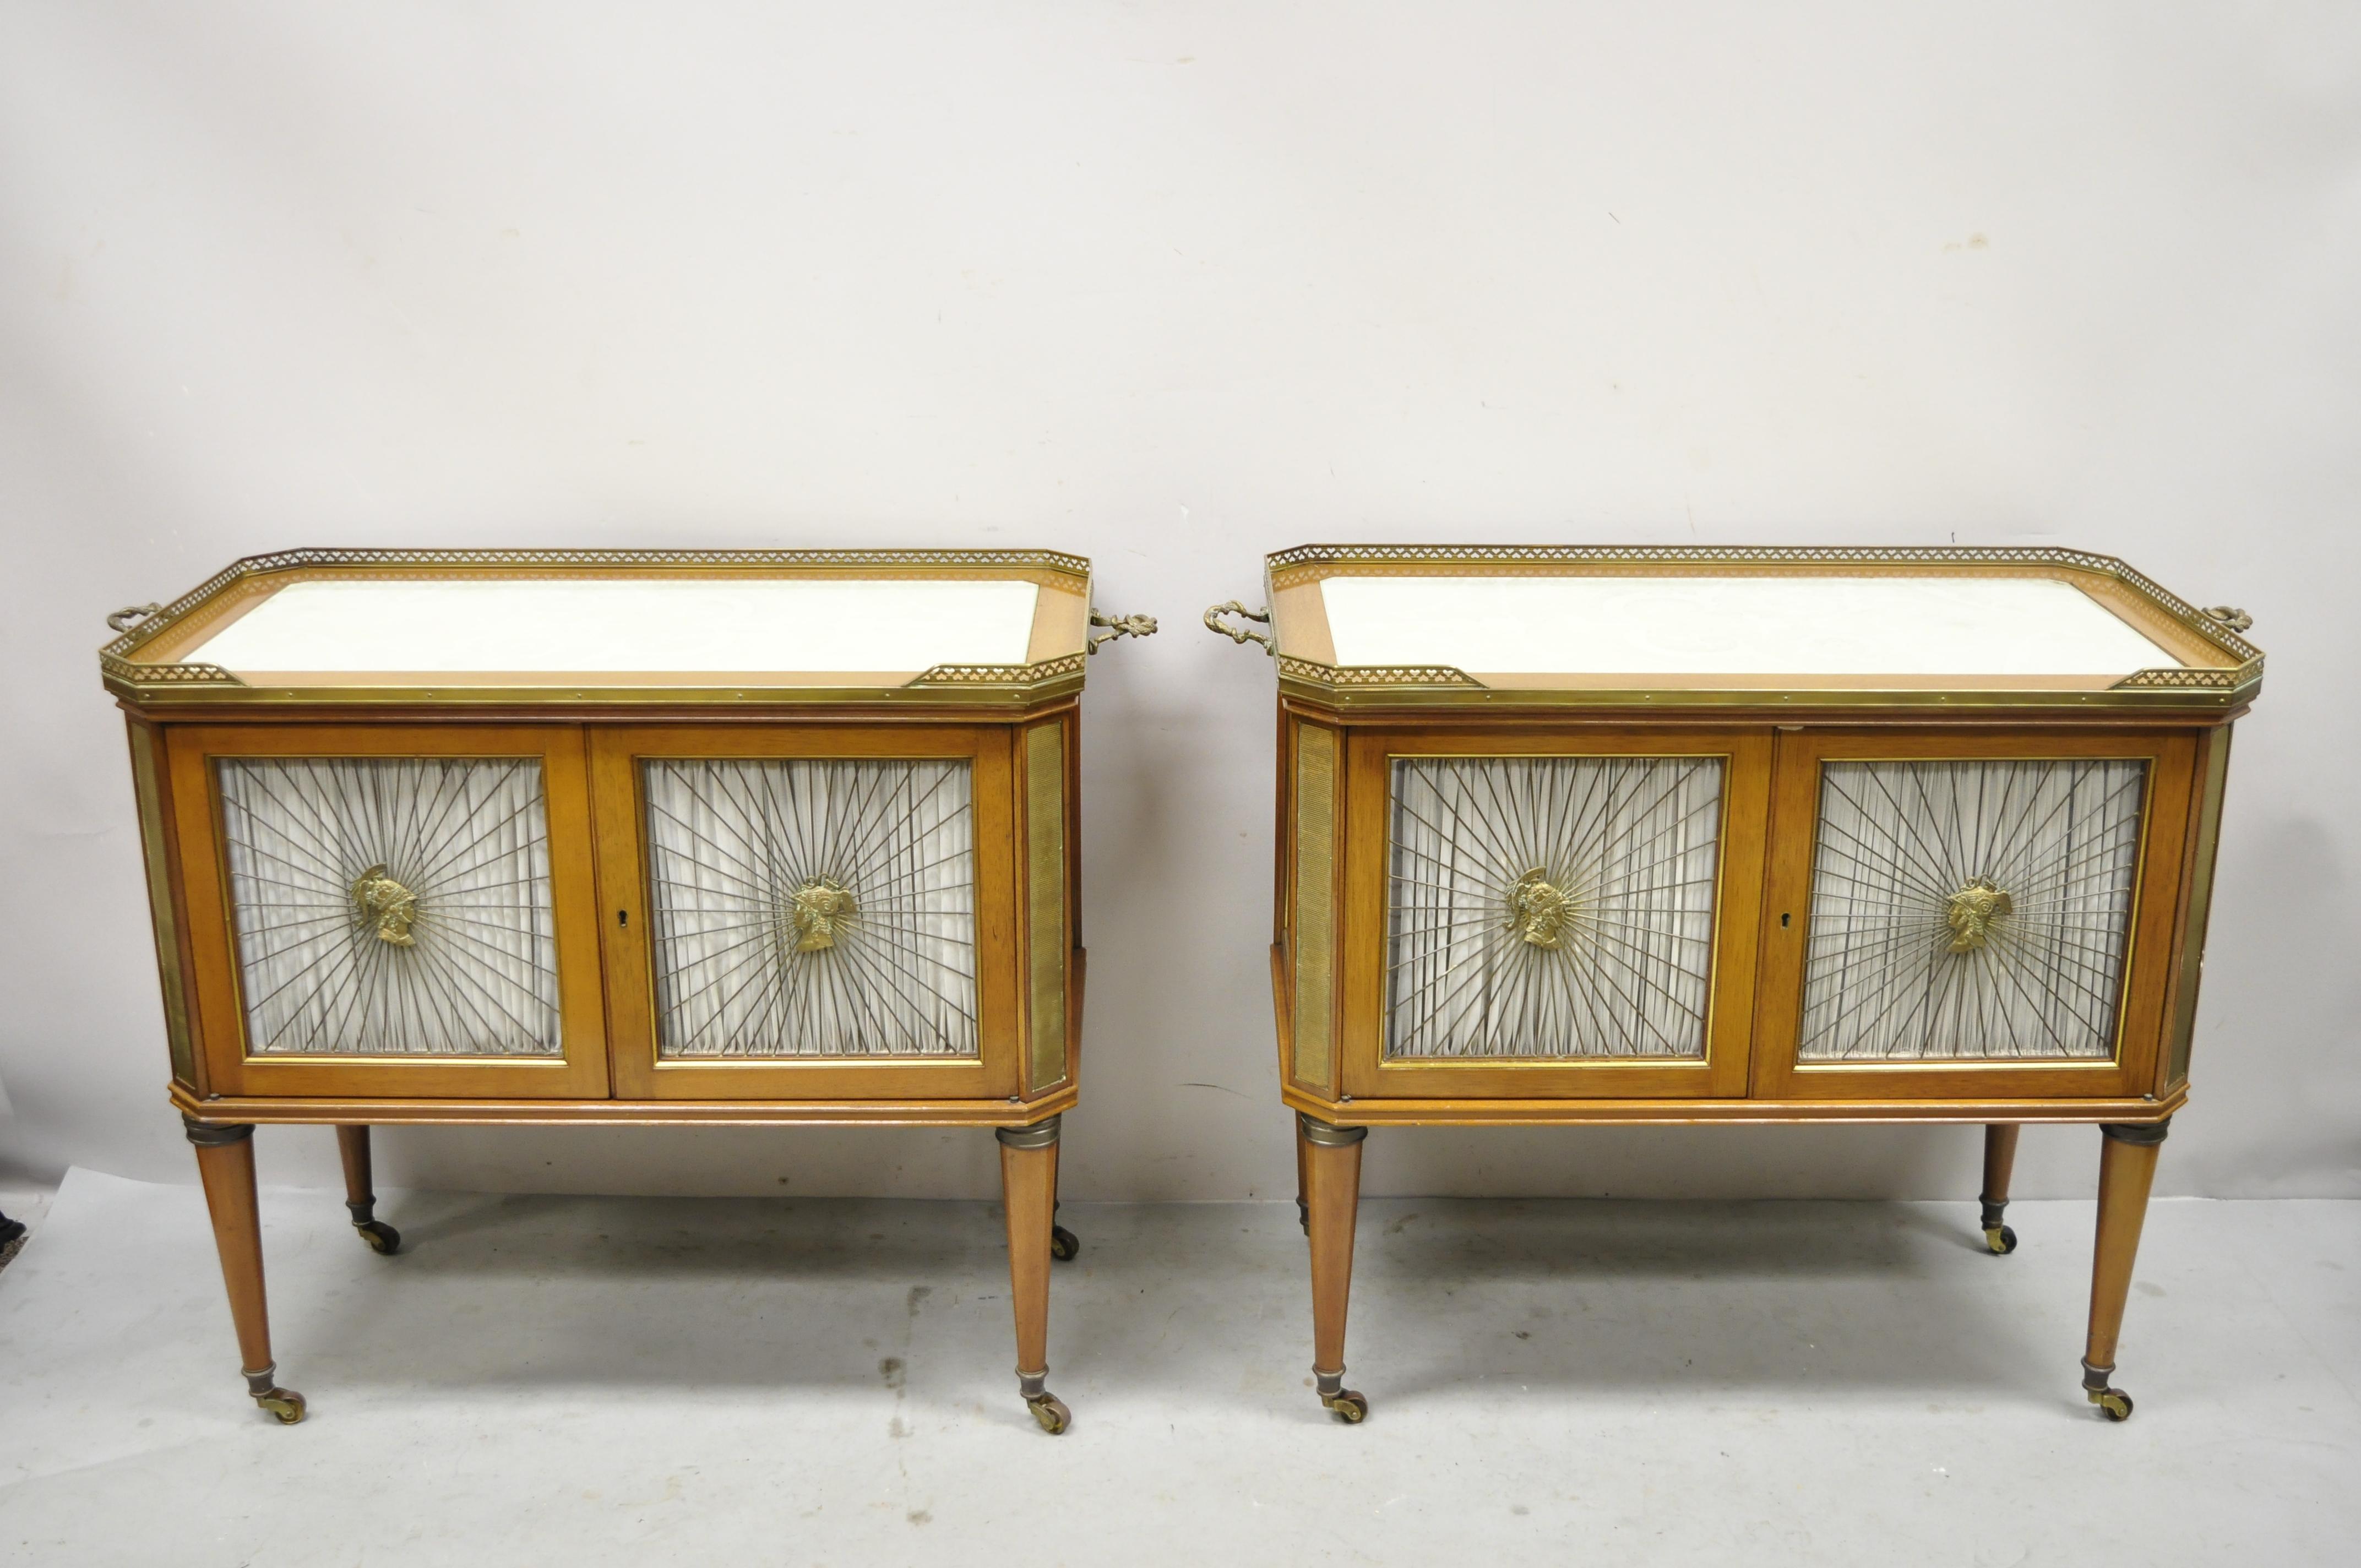 Vintage French Louis XVI neoclassical Regency style Mahogany server cabinet tables - a pair. Item features bronze mounts and gallery, soldier busts to door grills, inset glass tops, with scrollwork design, brass rolling casters, ornate side handles,